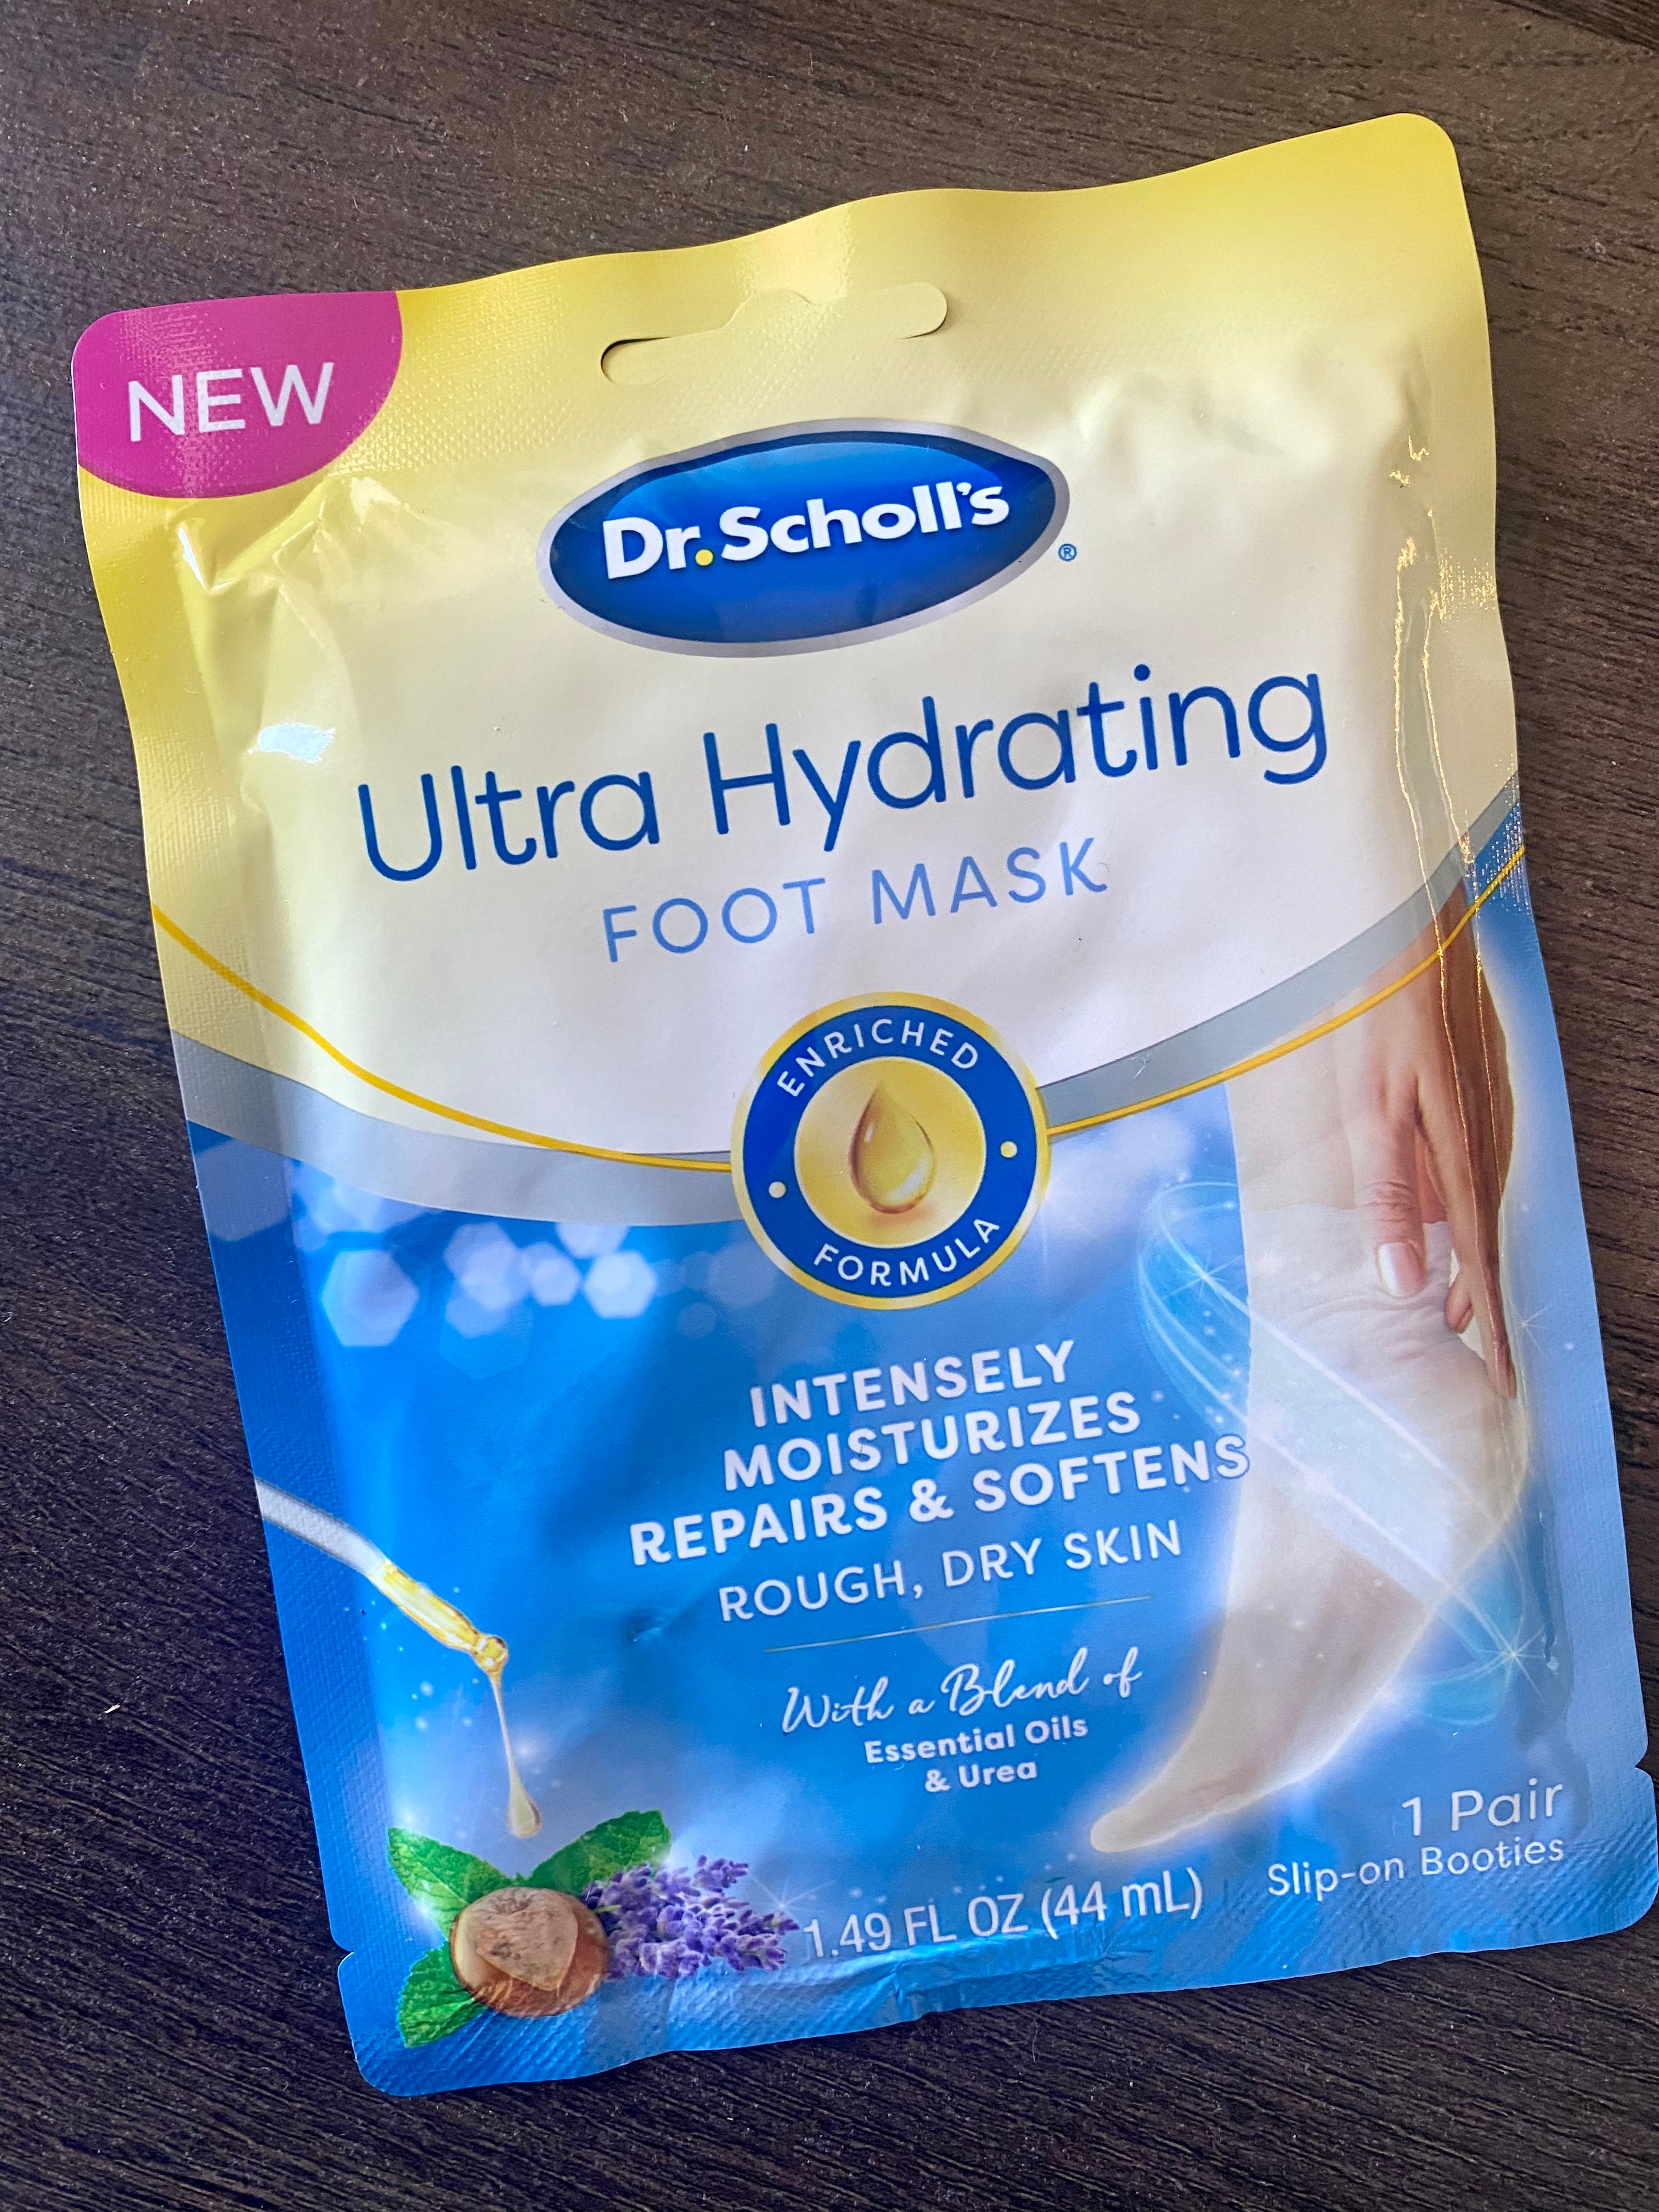  Dr. Scholl's Rough, Dry Skin Ultra Exfoliating Foot